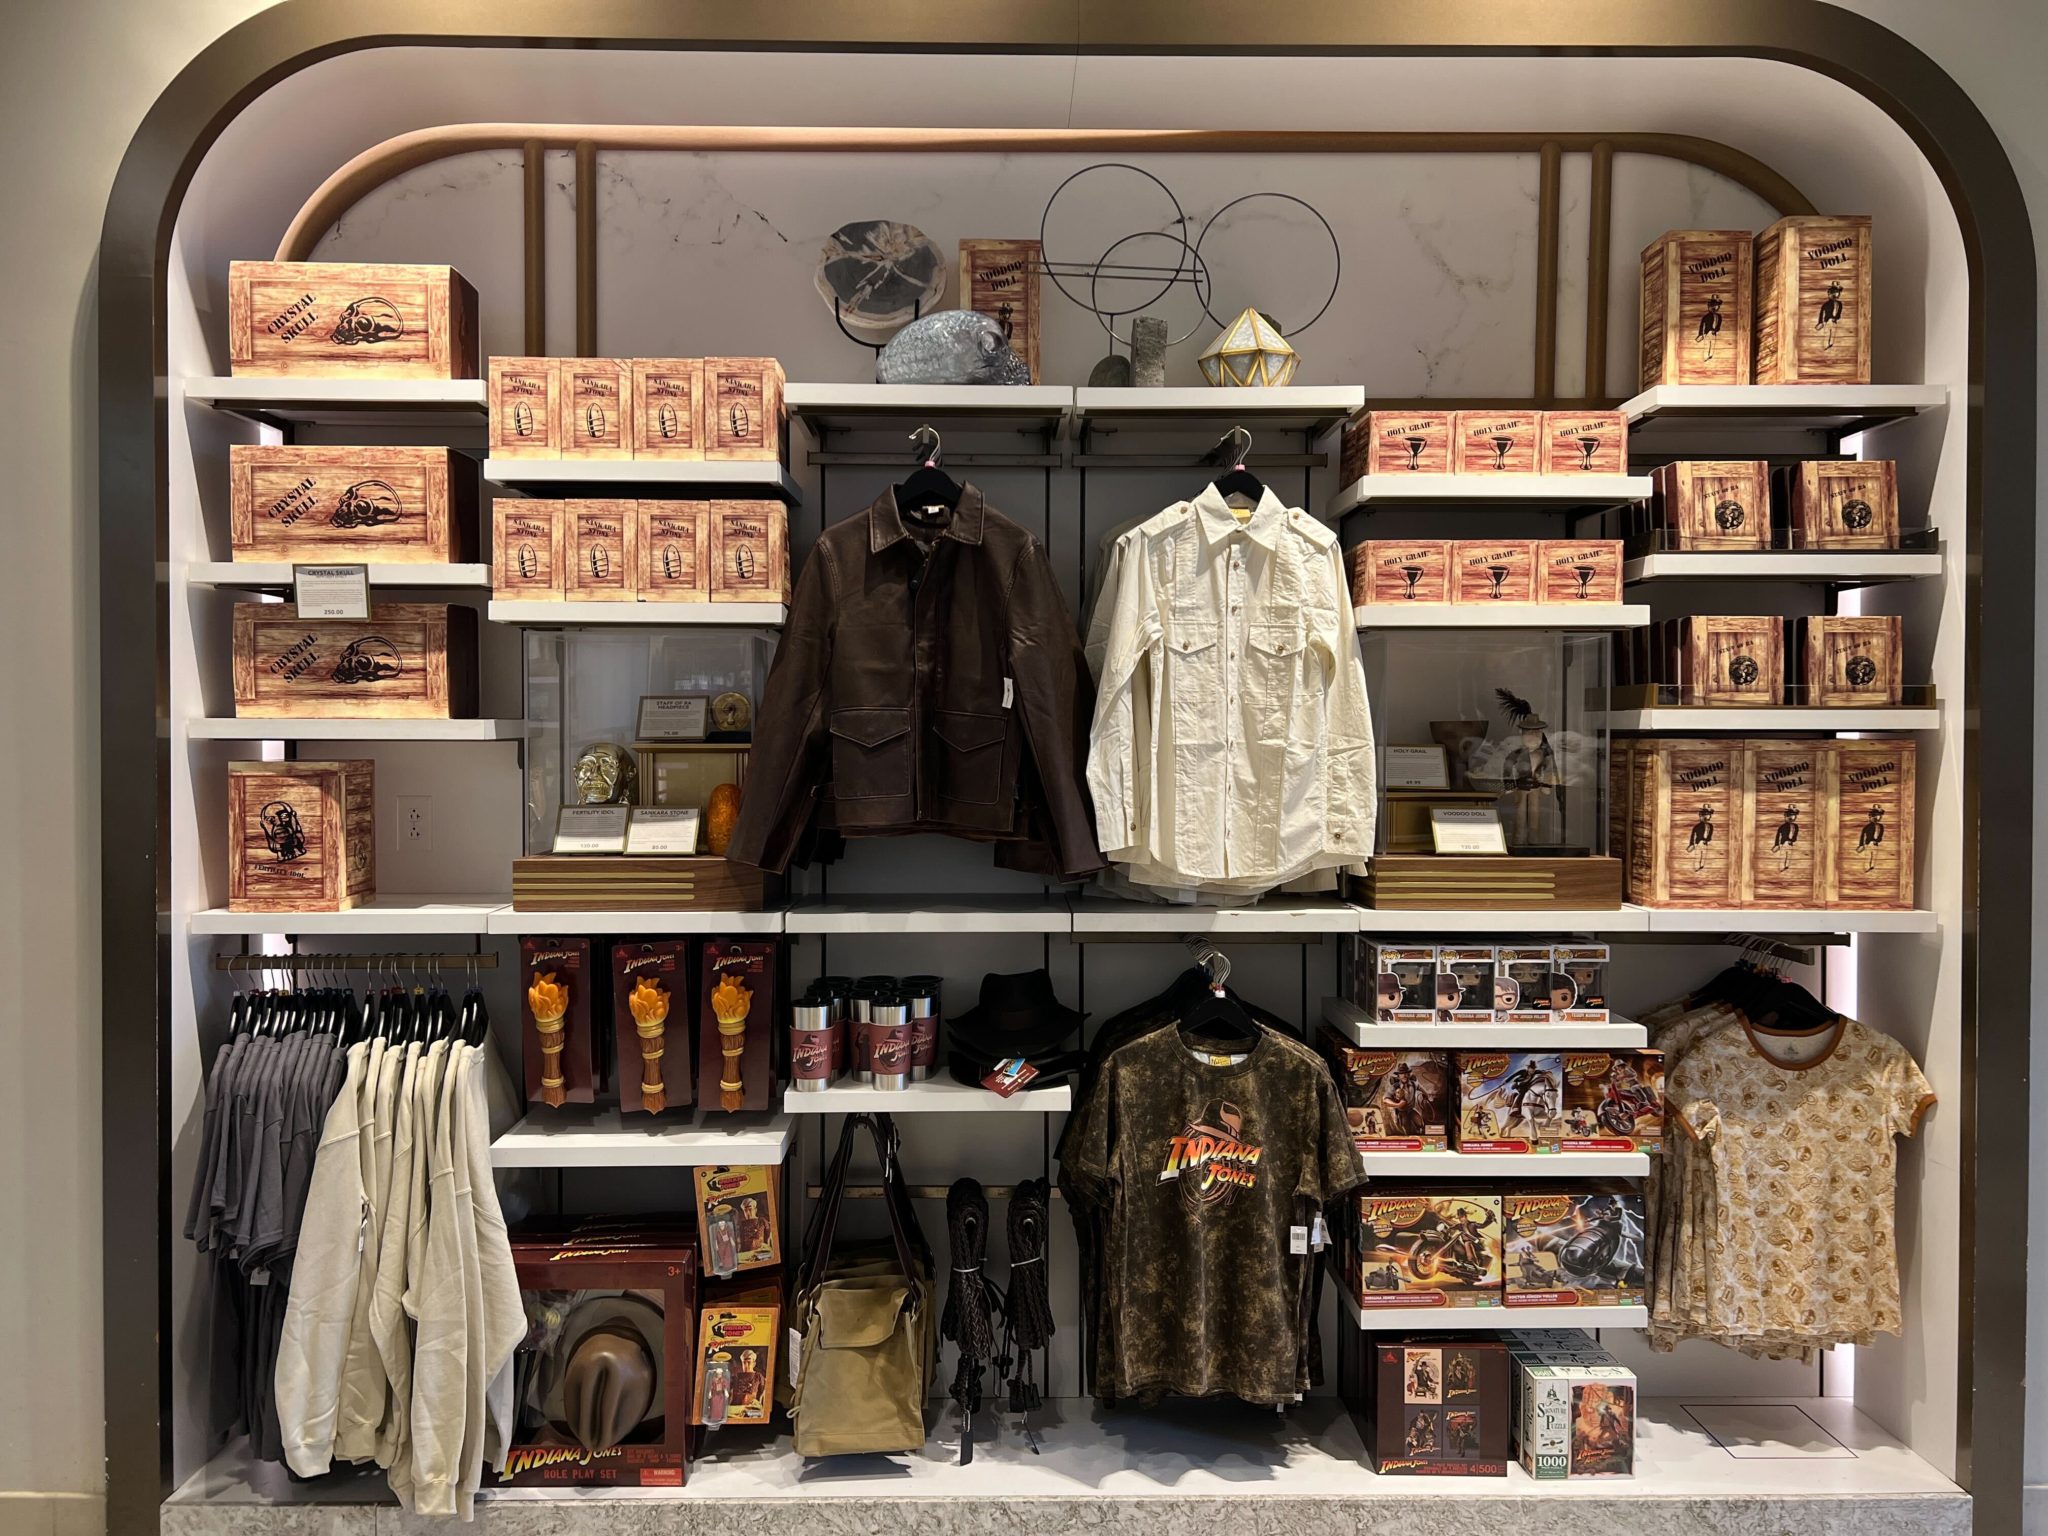 Get Adventurous with NEW Indiana Jones Merchandise from Hollywood ...